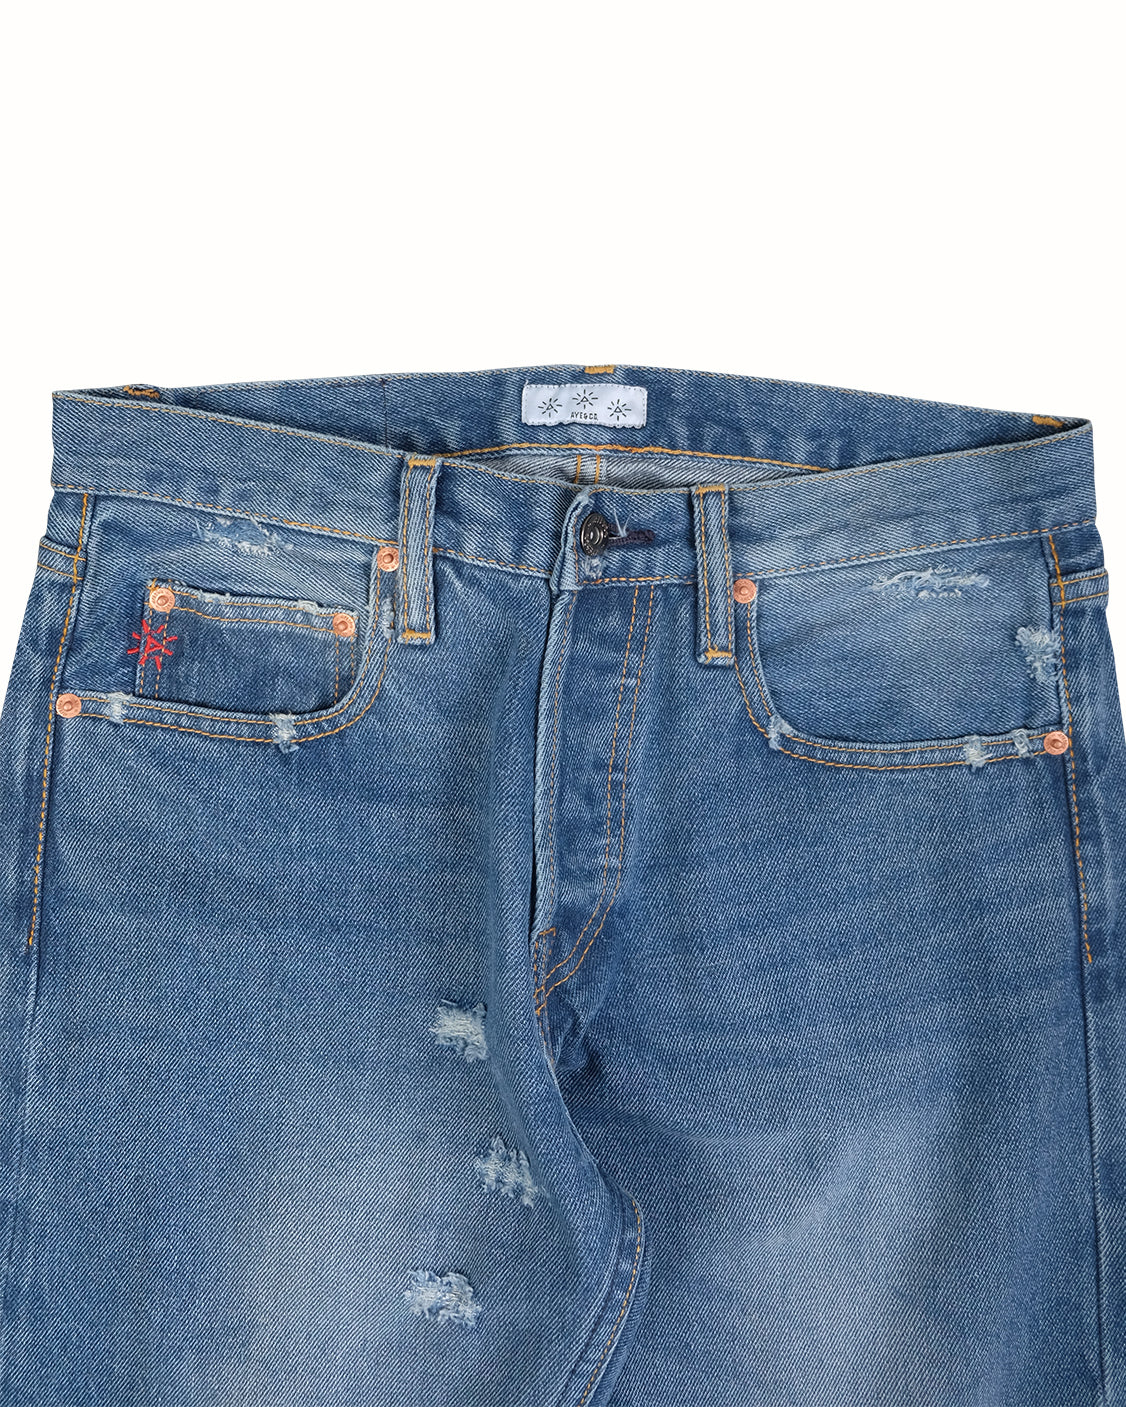 Knight West Jeans - Distressed Washed